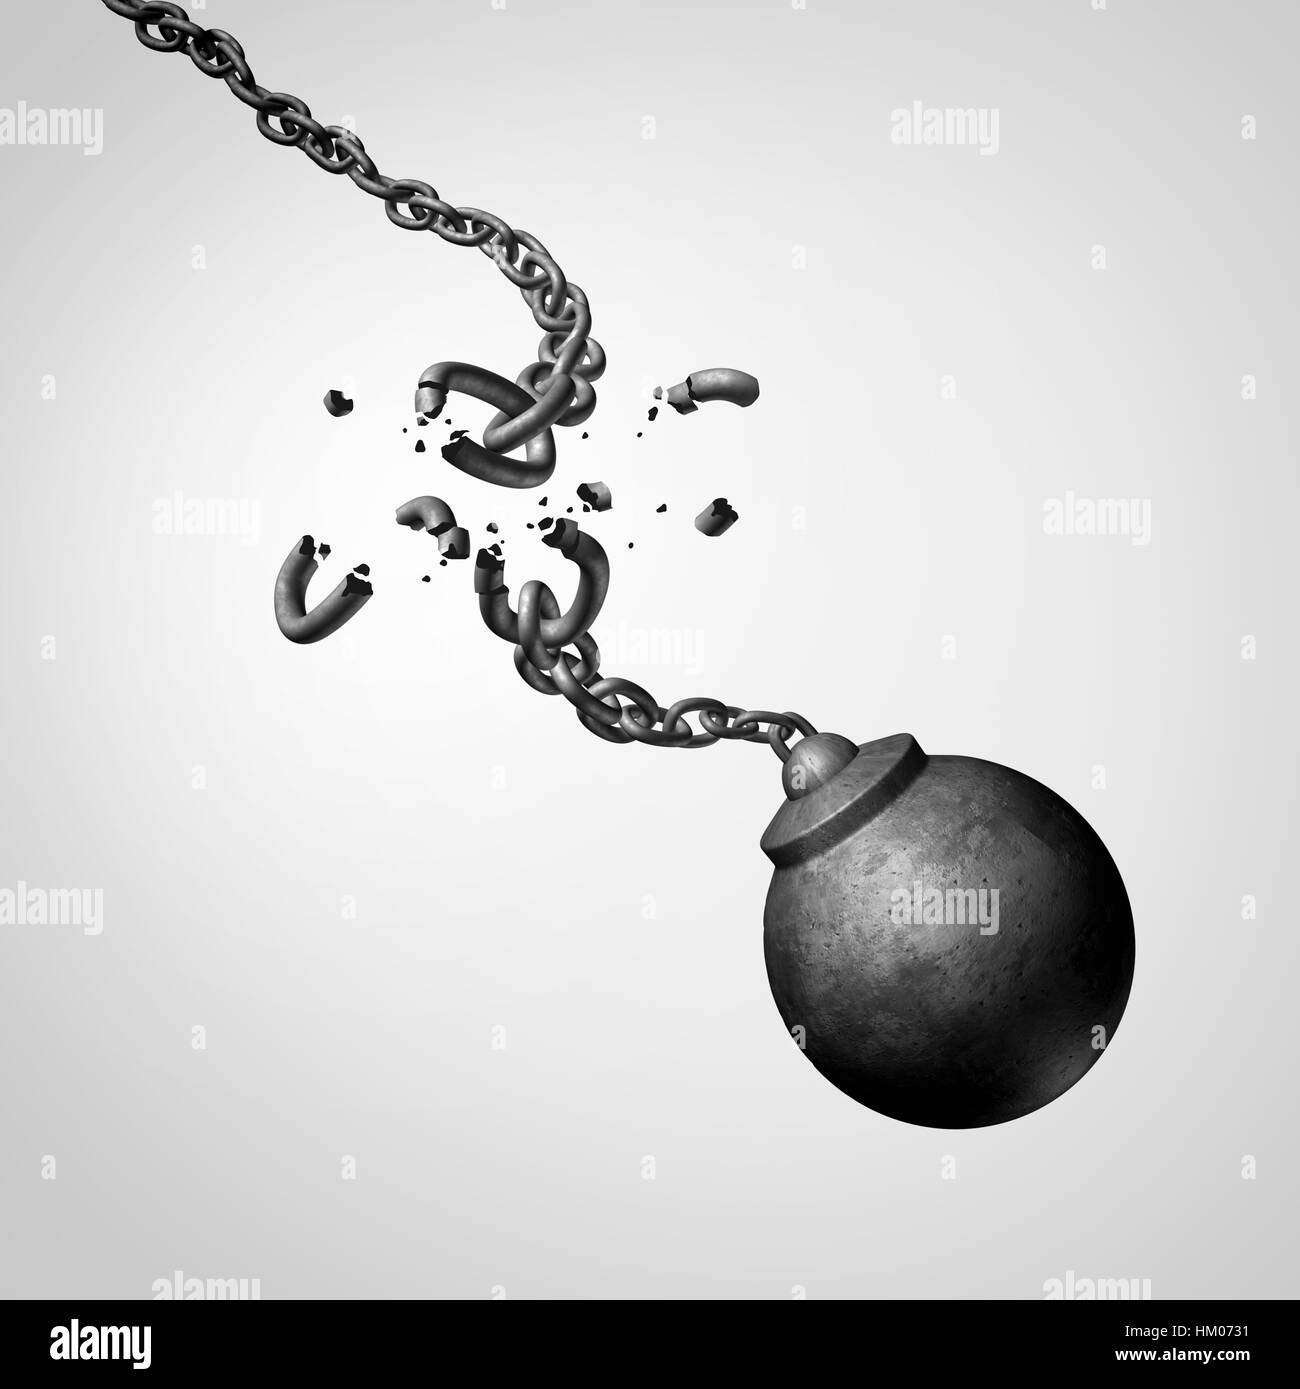 Chaos and risk business concept as a broken chain holding a falling dangerous wrecking ball as a volatility metaphor for erratic unpredictable. Stock Photo